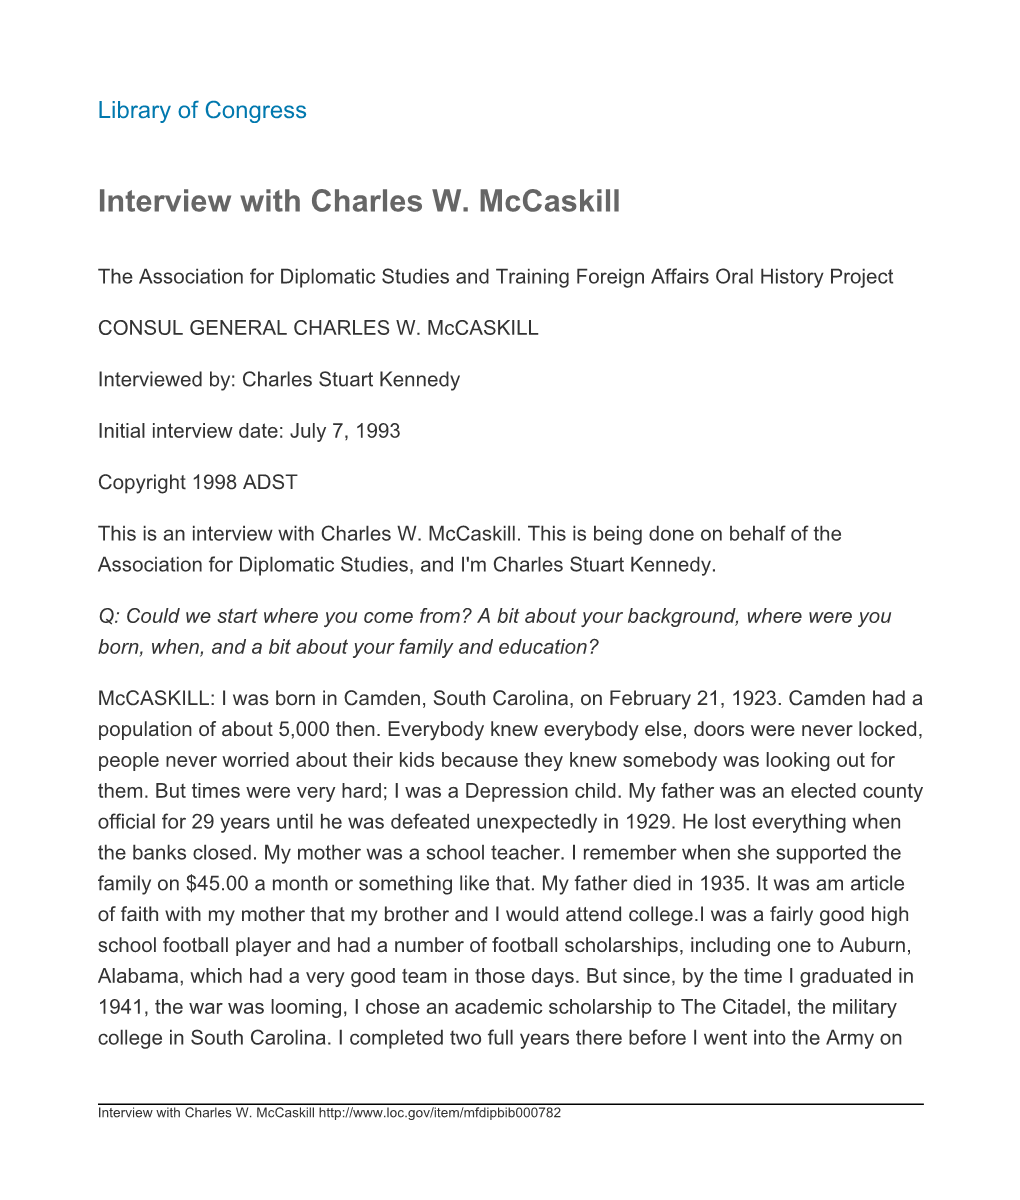 Interview with Charles W. Mccaskill